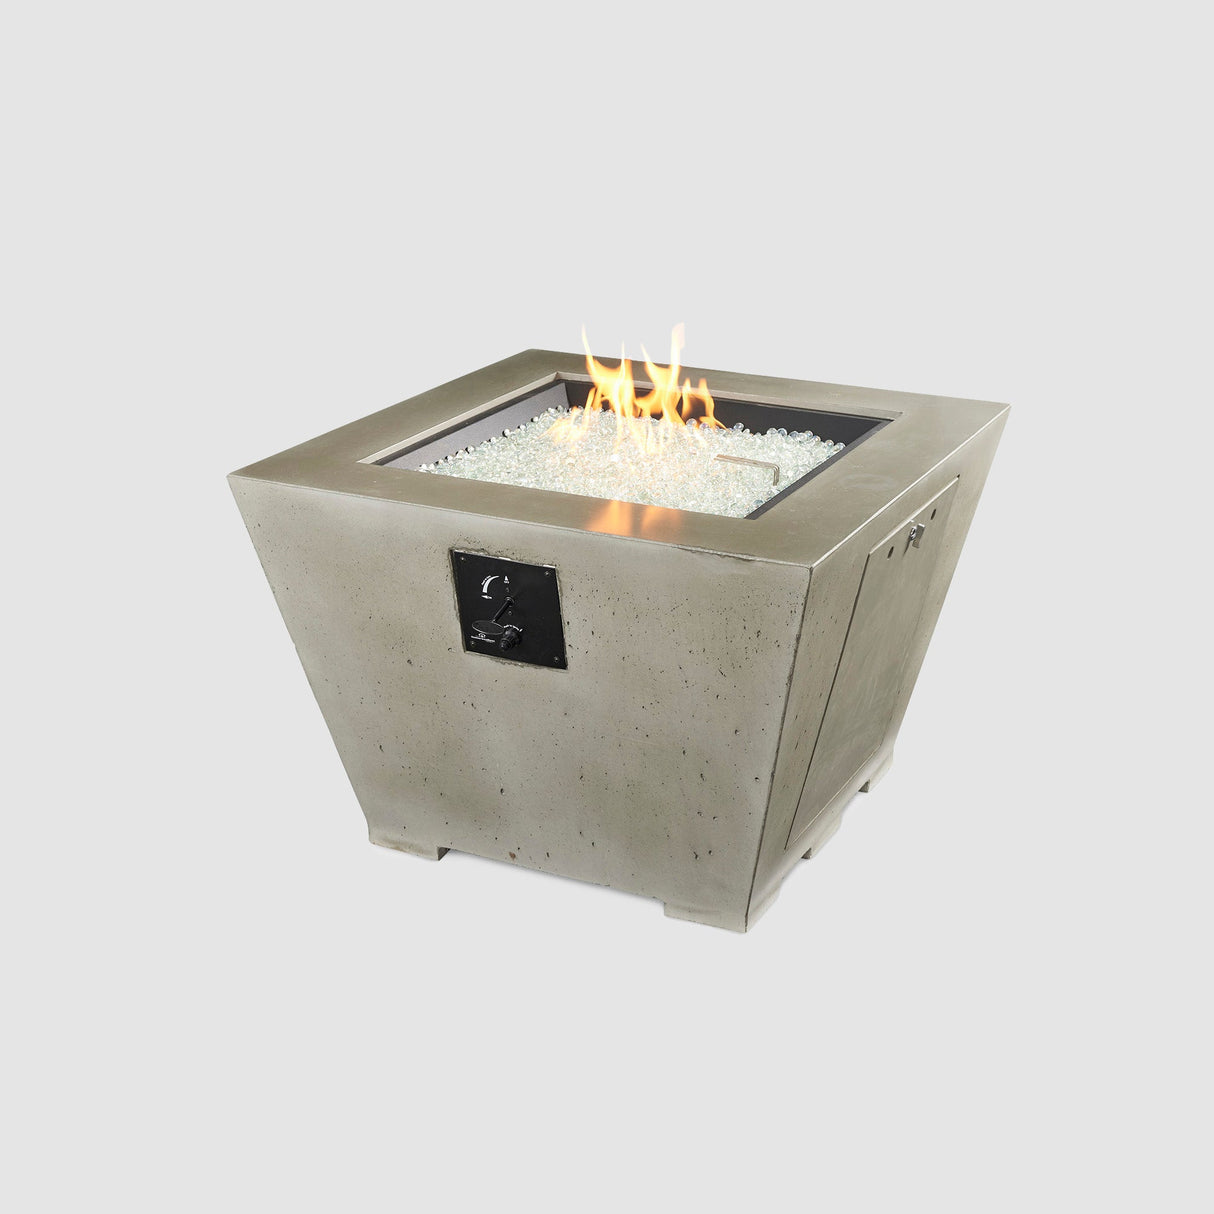 Cove Square Gas Fire Pit Bowl on a grey background